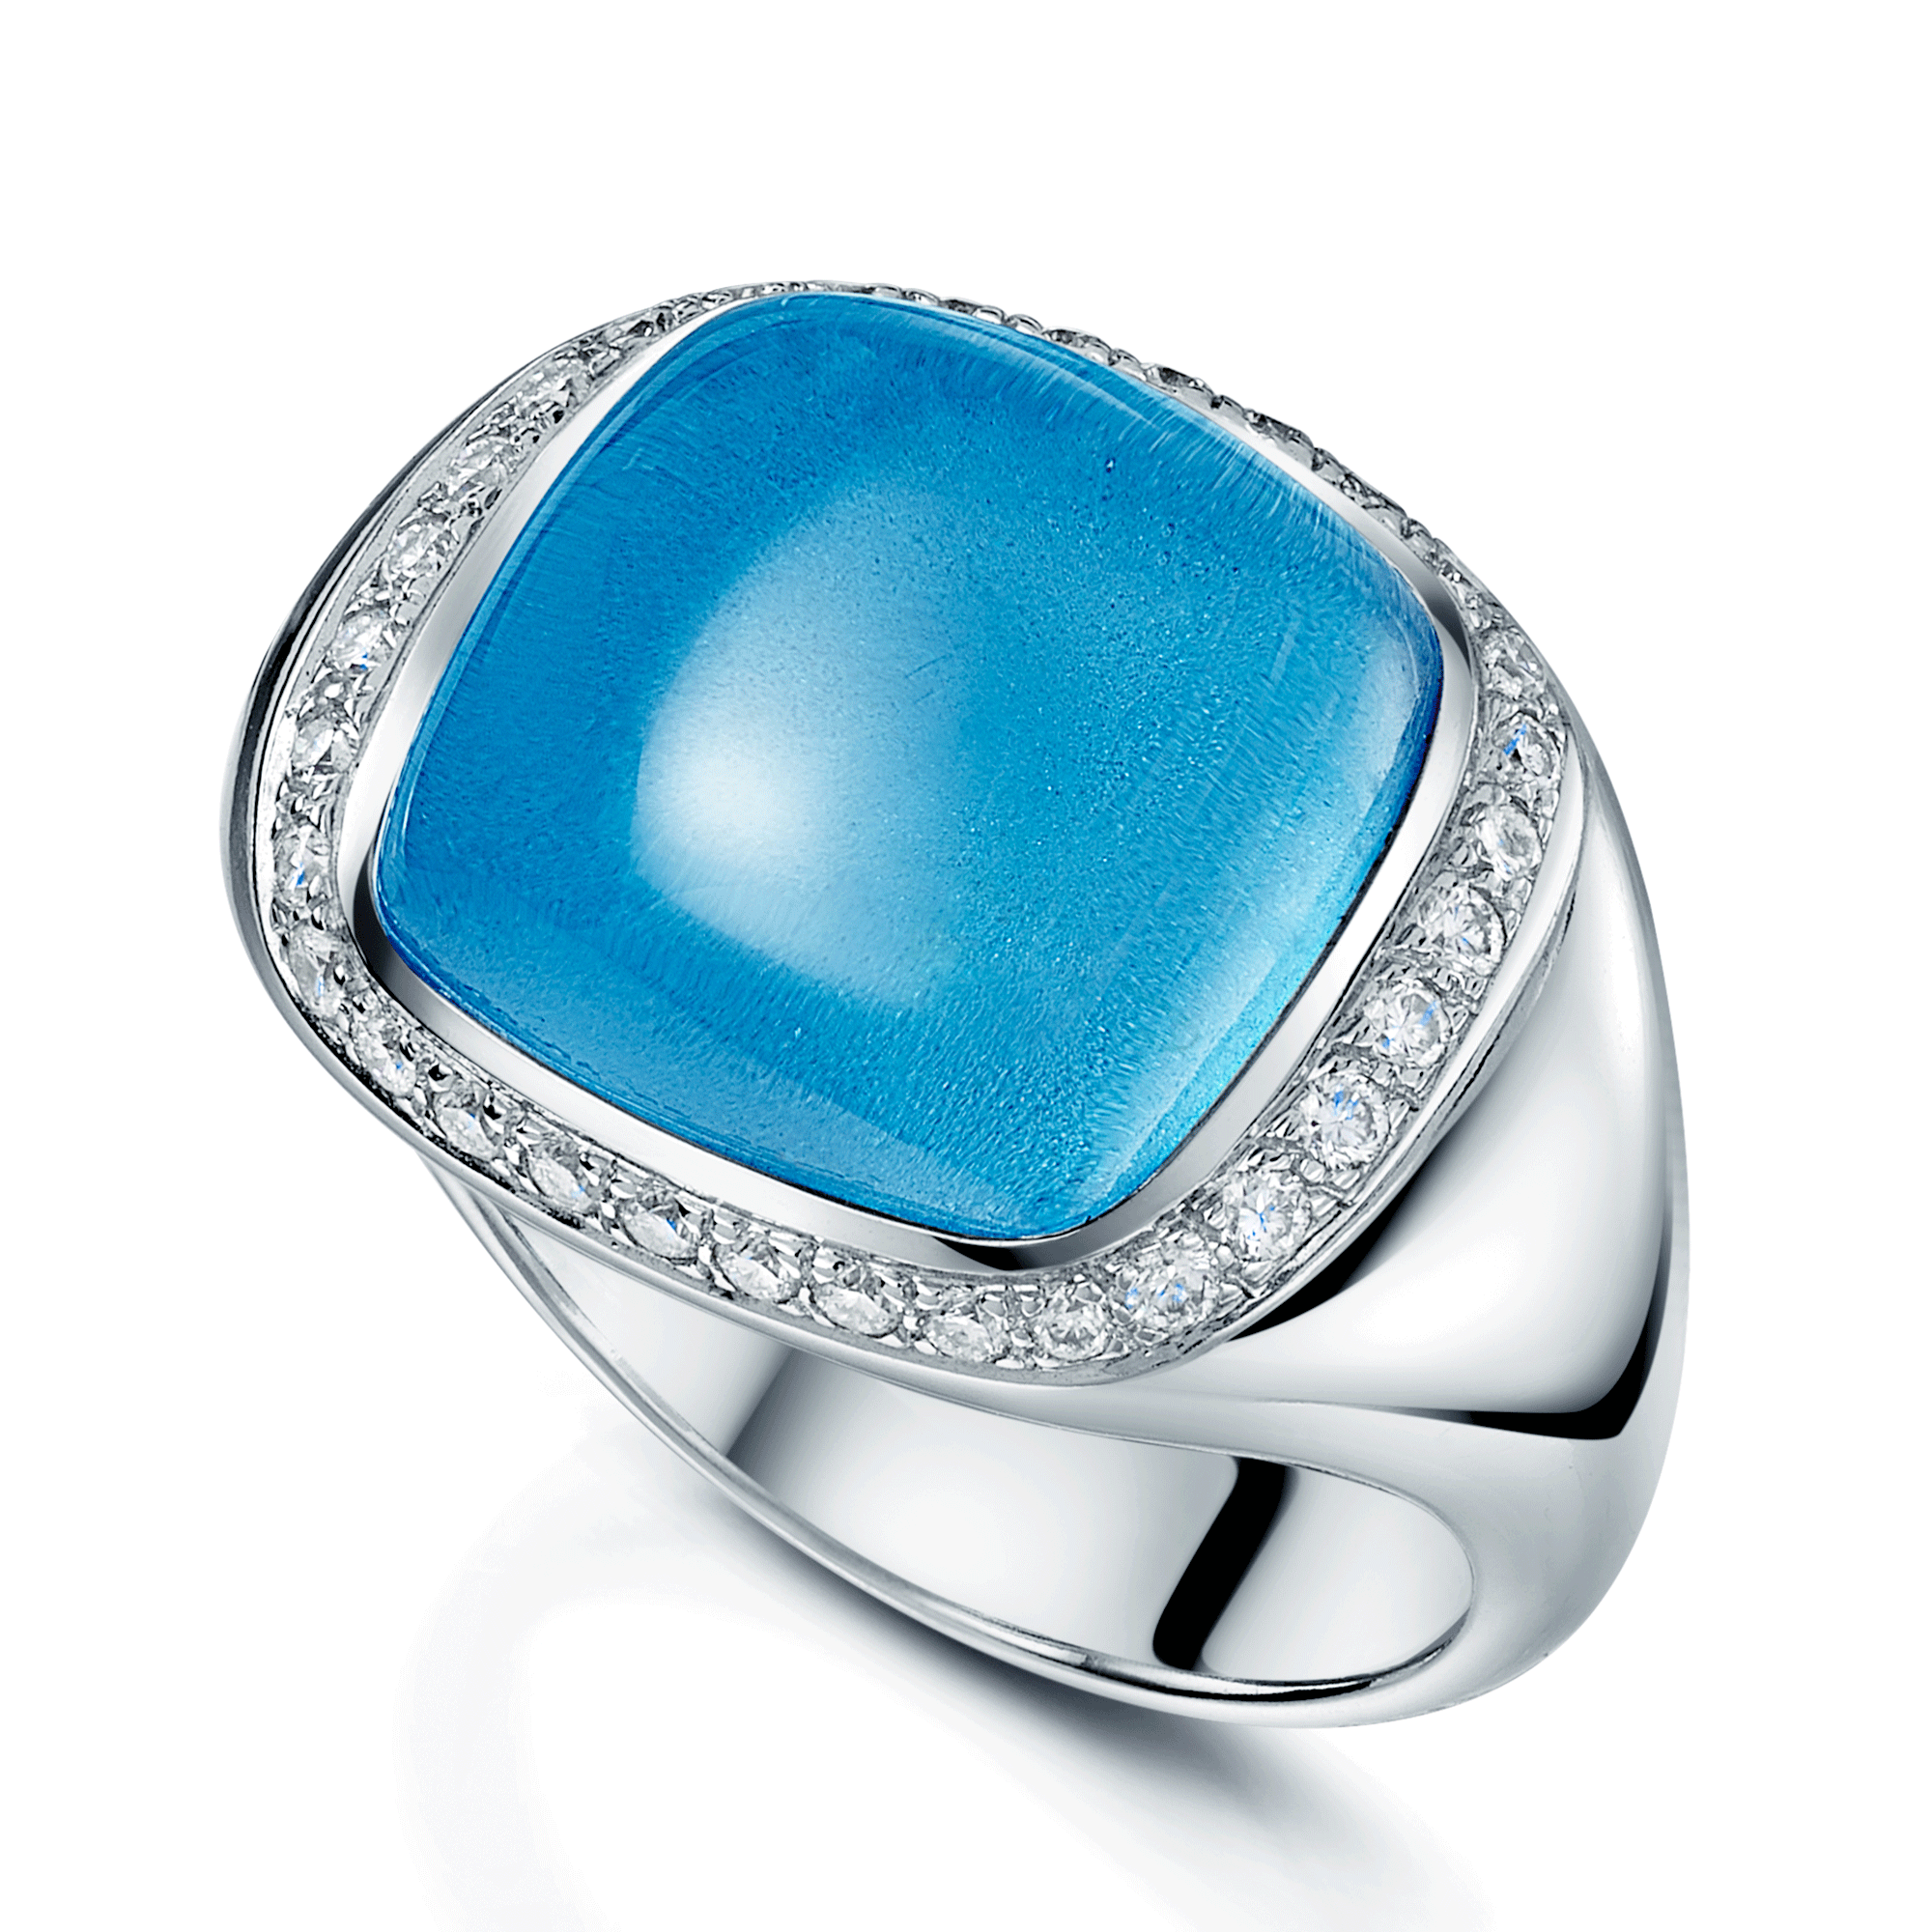 18ct White Gold Cabochon Cut Blue Topaz And Diamond Dress Ring